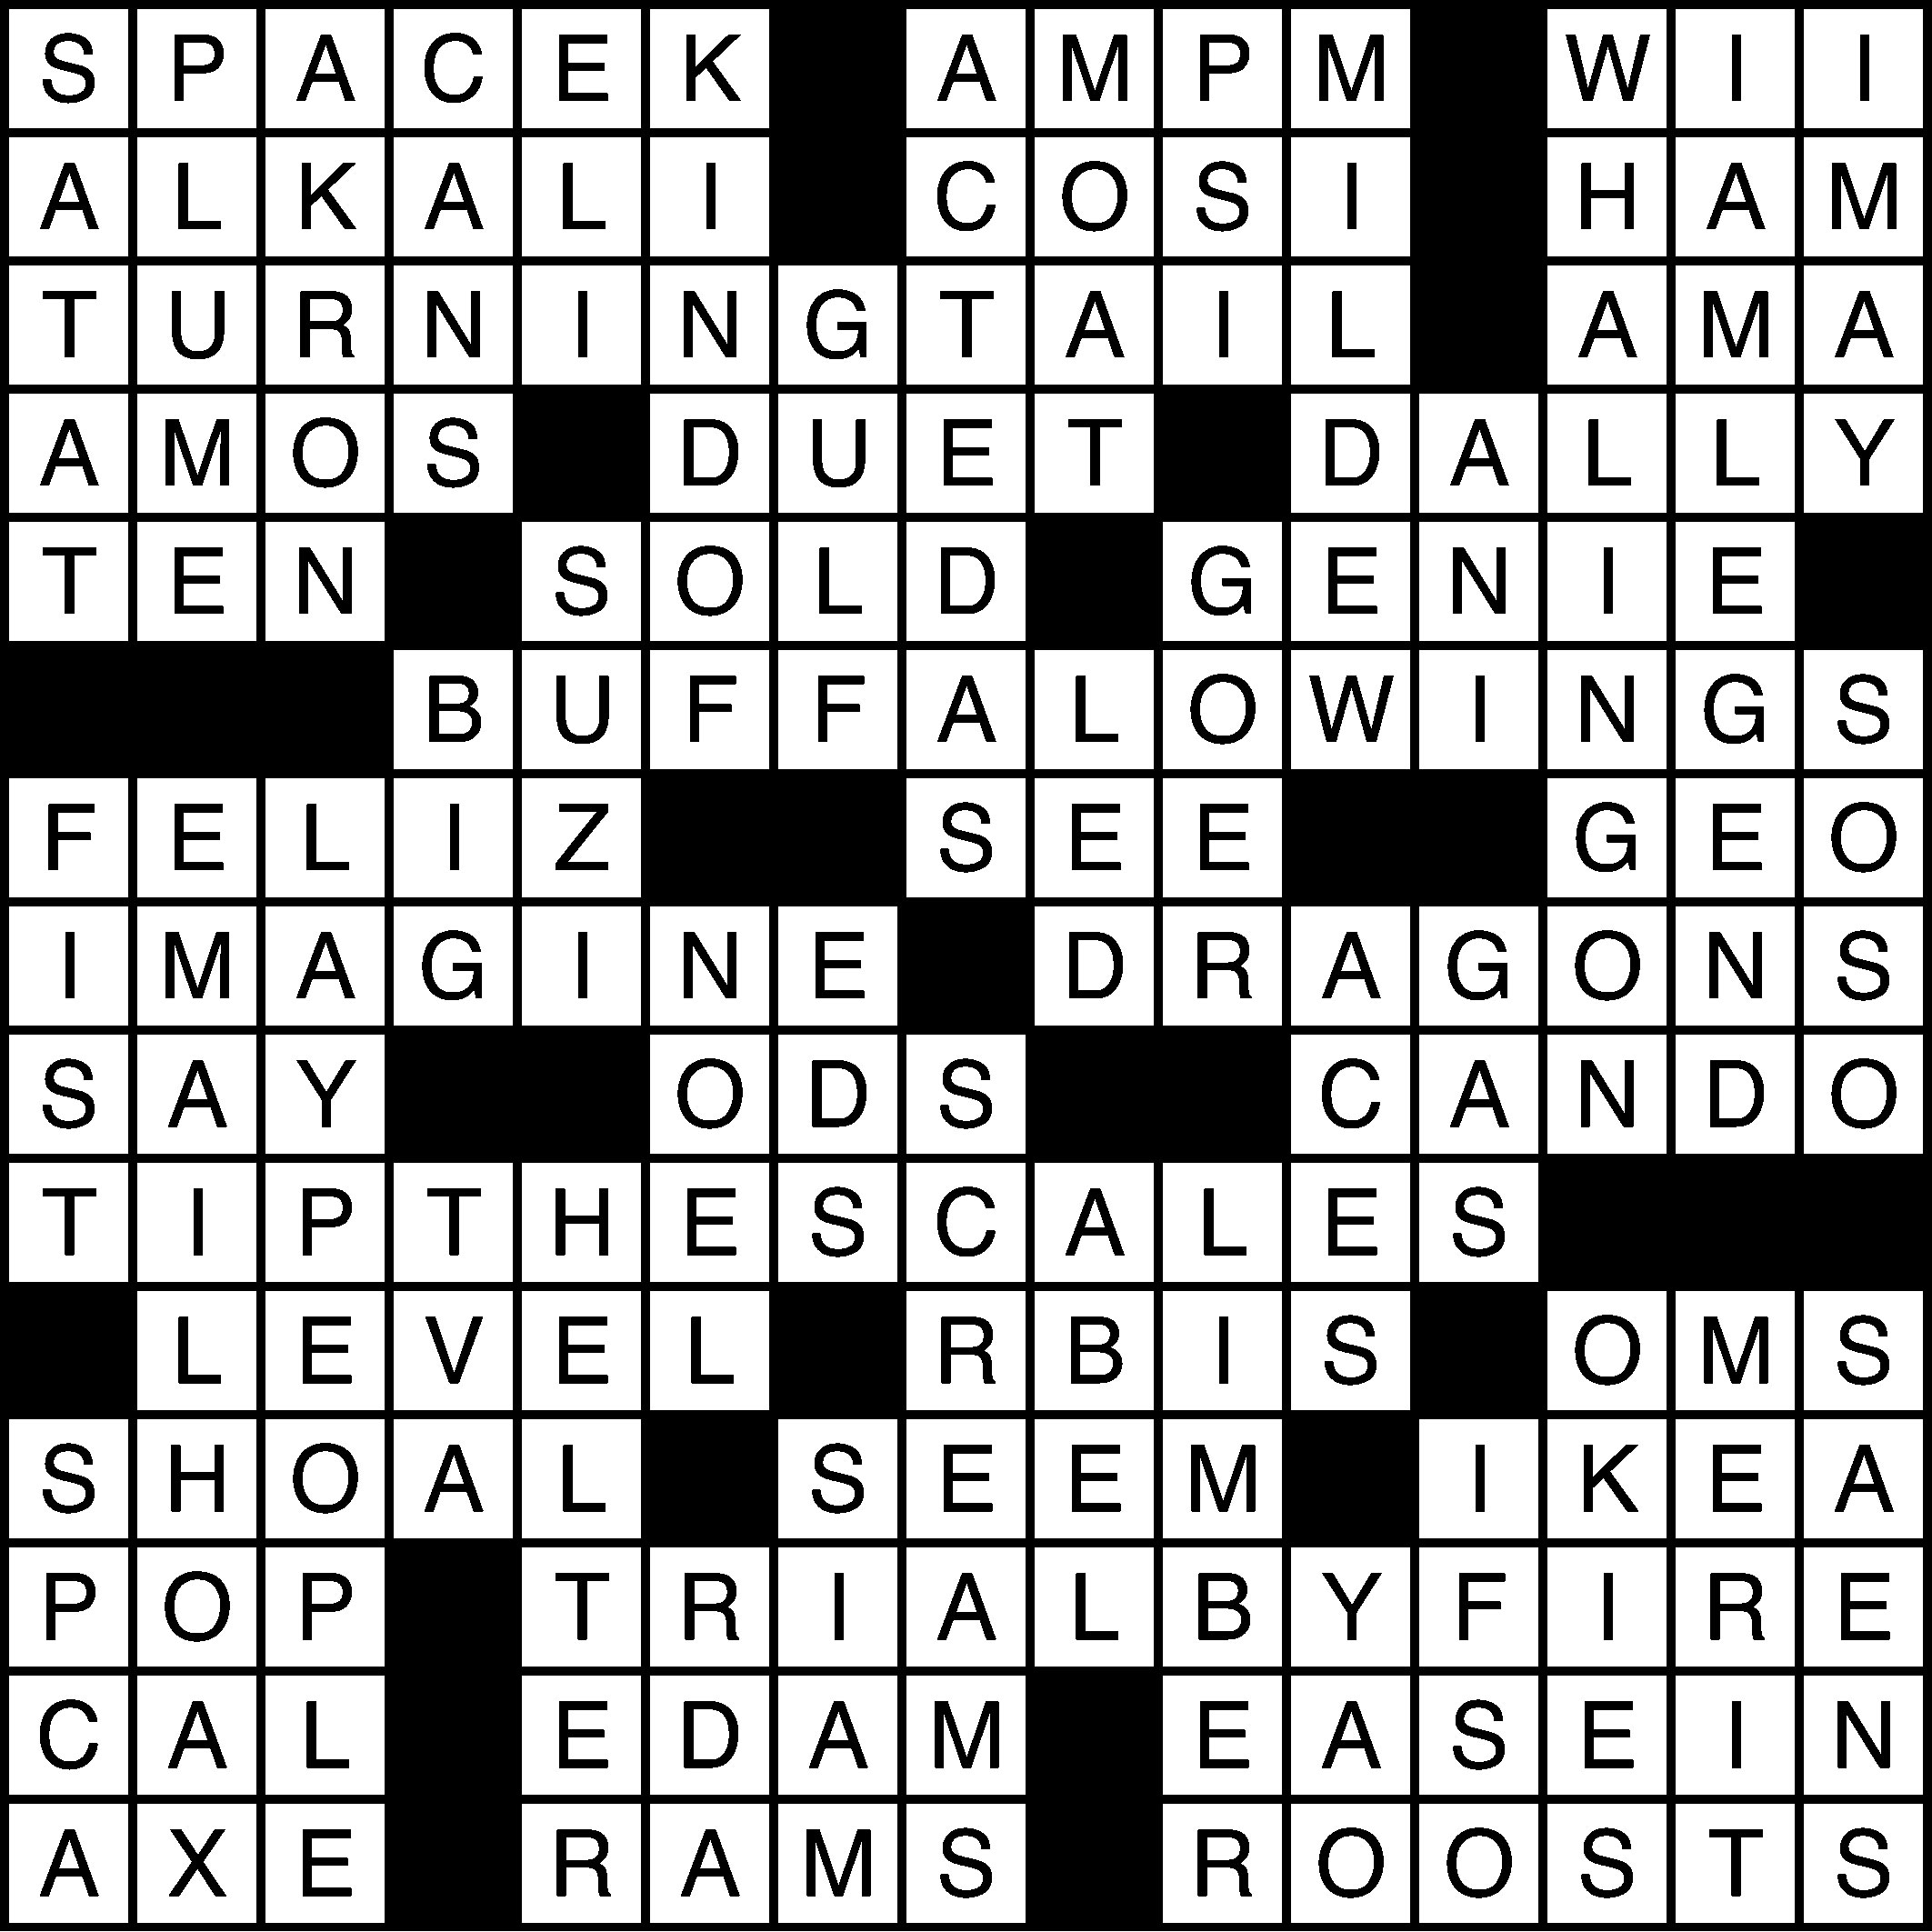 At one point crossword